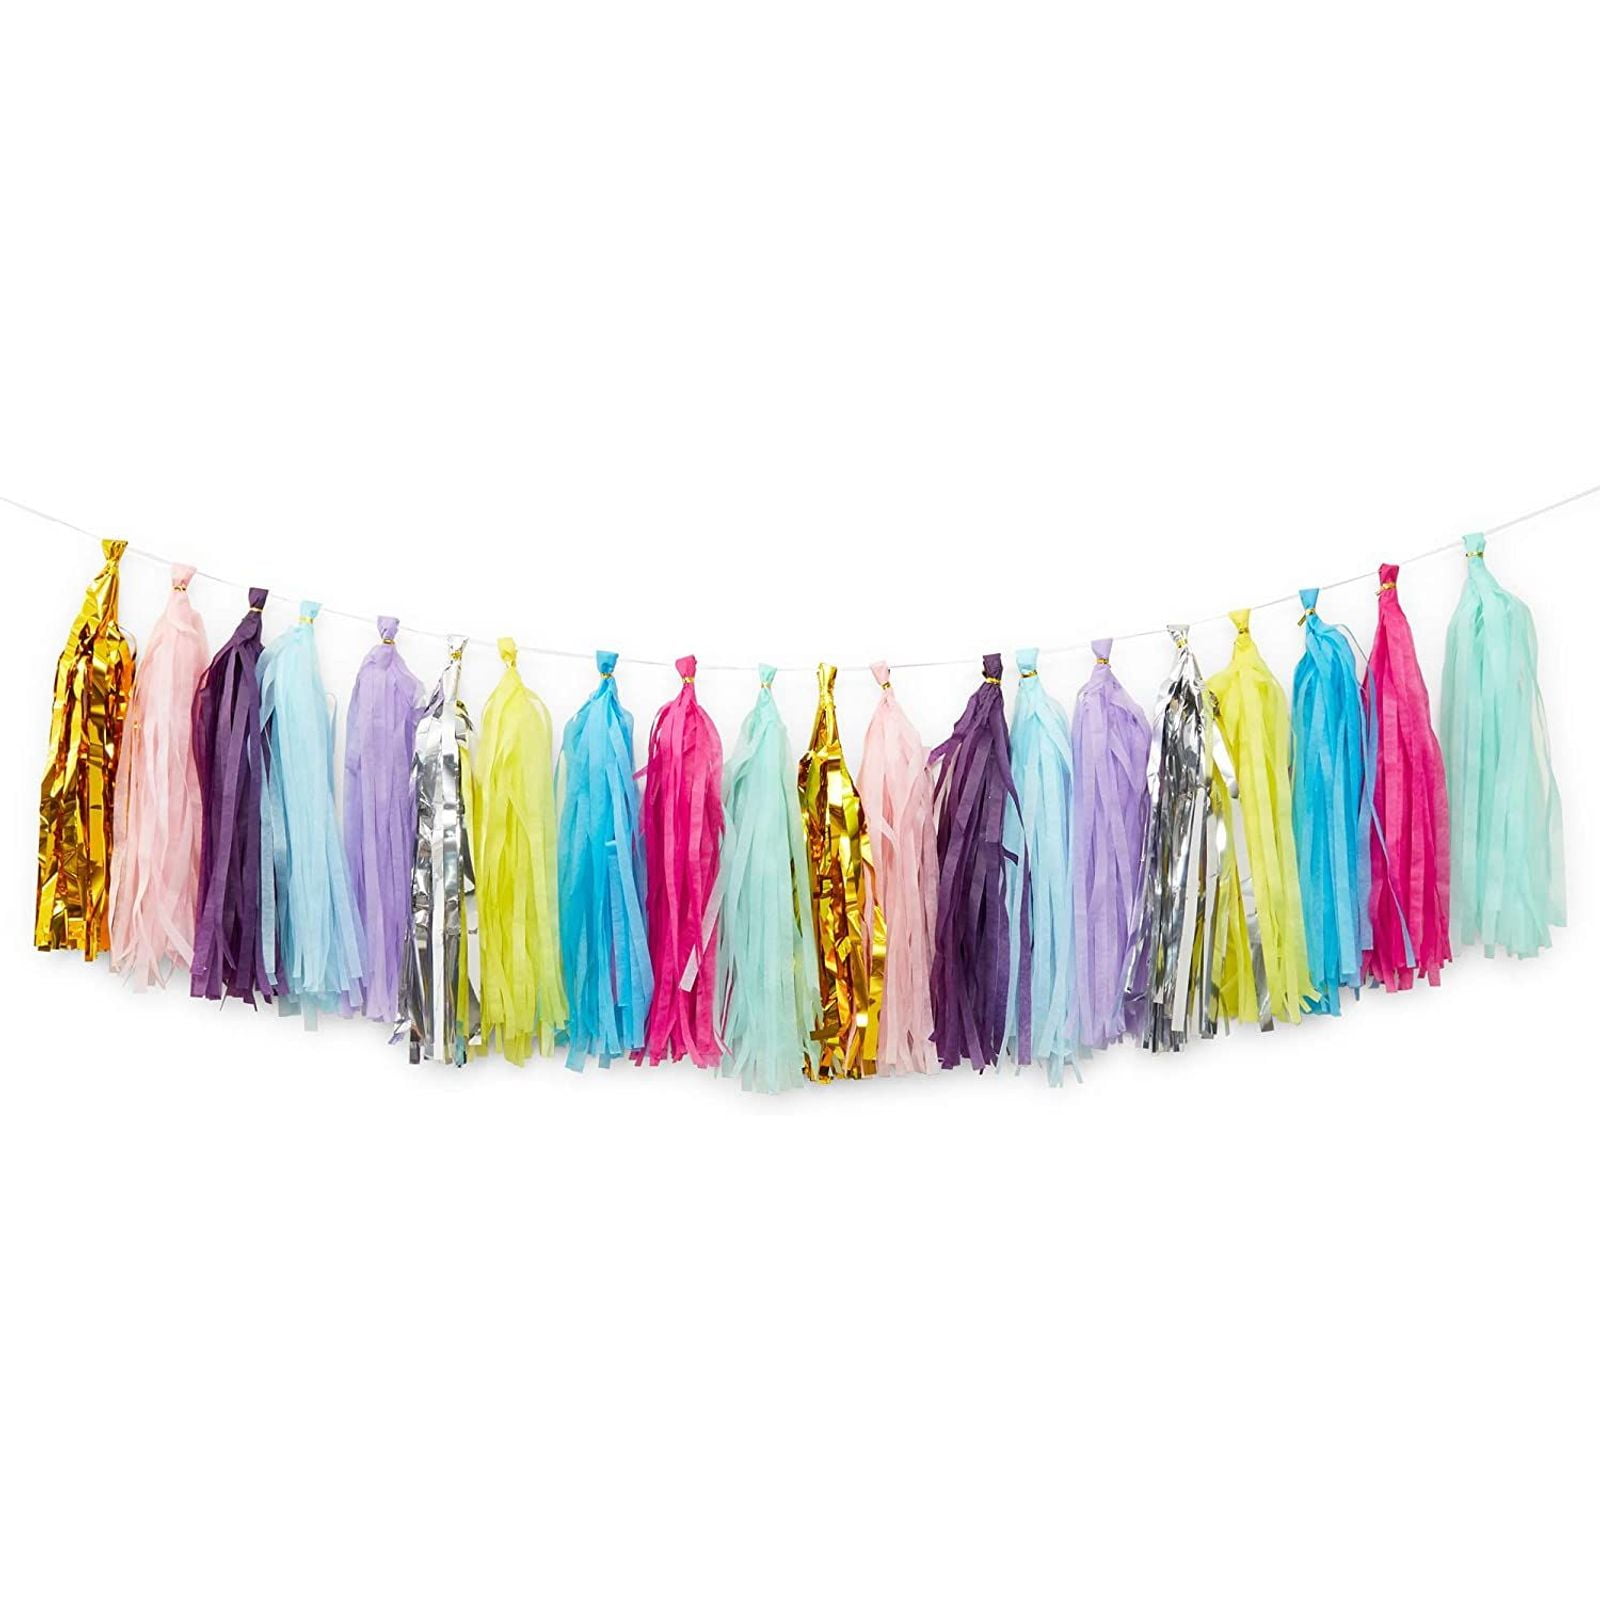 Unicorn Wedding Decorations Hot Pink 20 Tassel Princess Tissue Paper Garland Birthday Party Decorations Easter Purple FAST SHIPPING